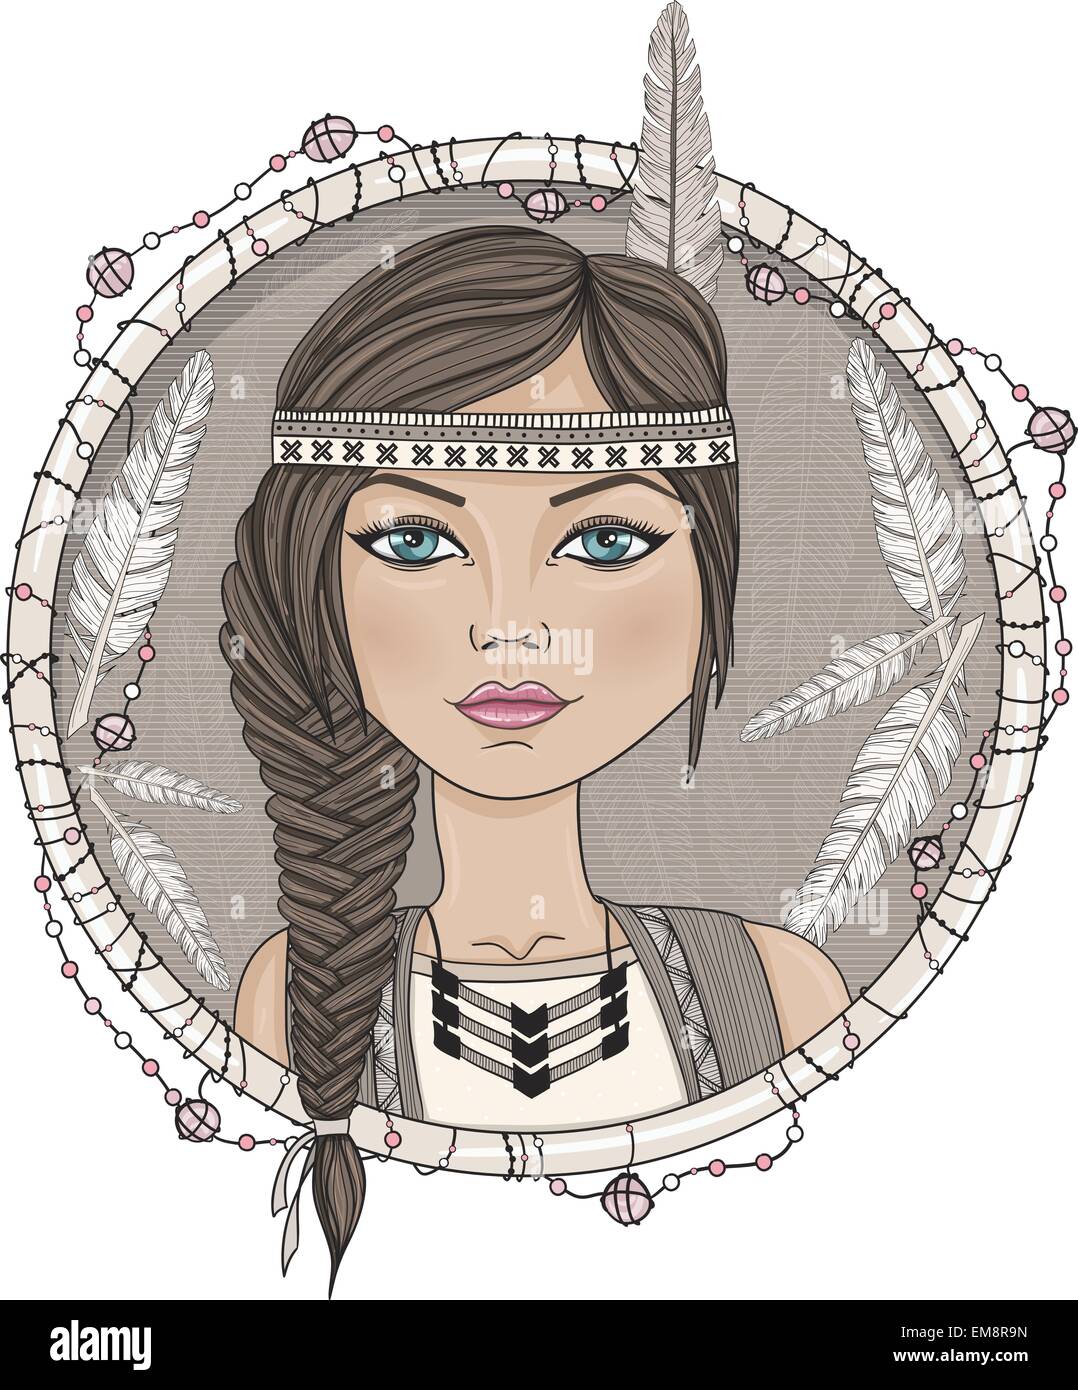 native american hairstyle stock photos & native american